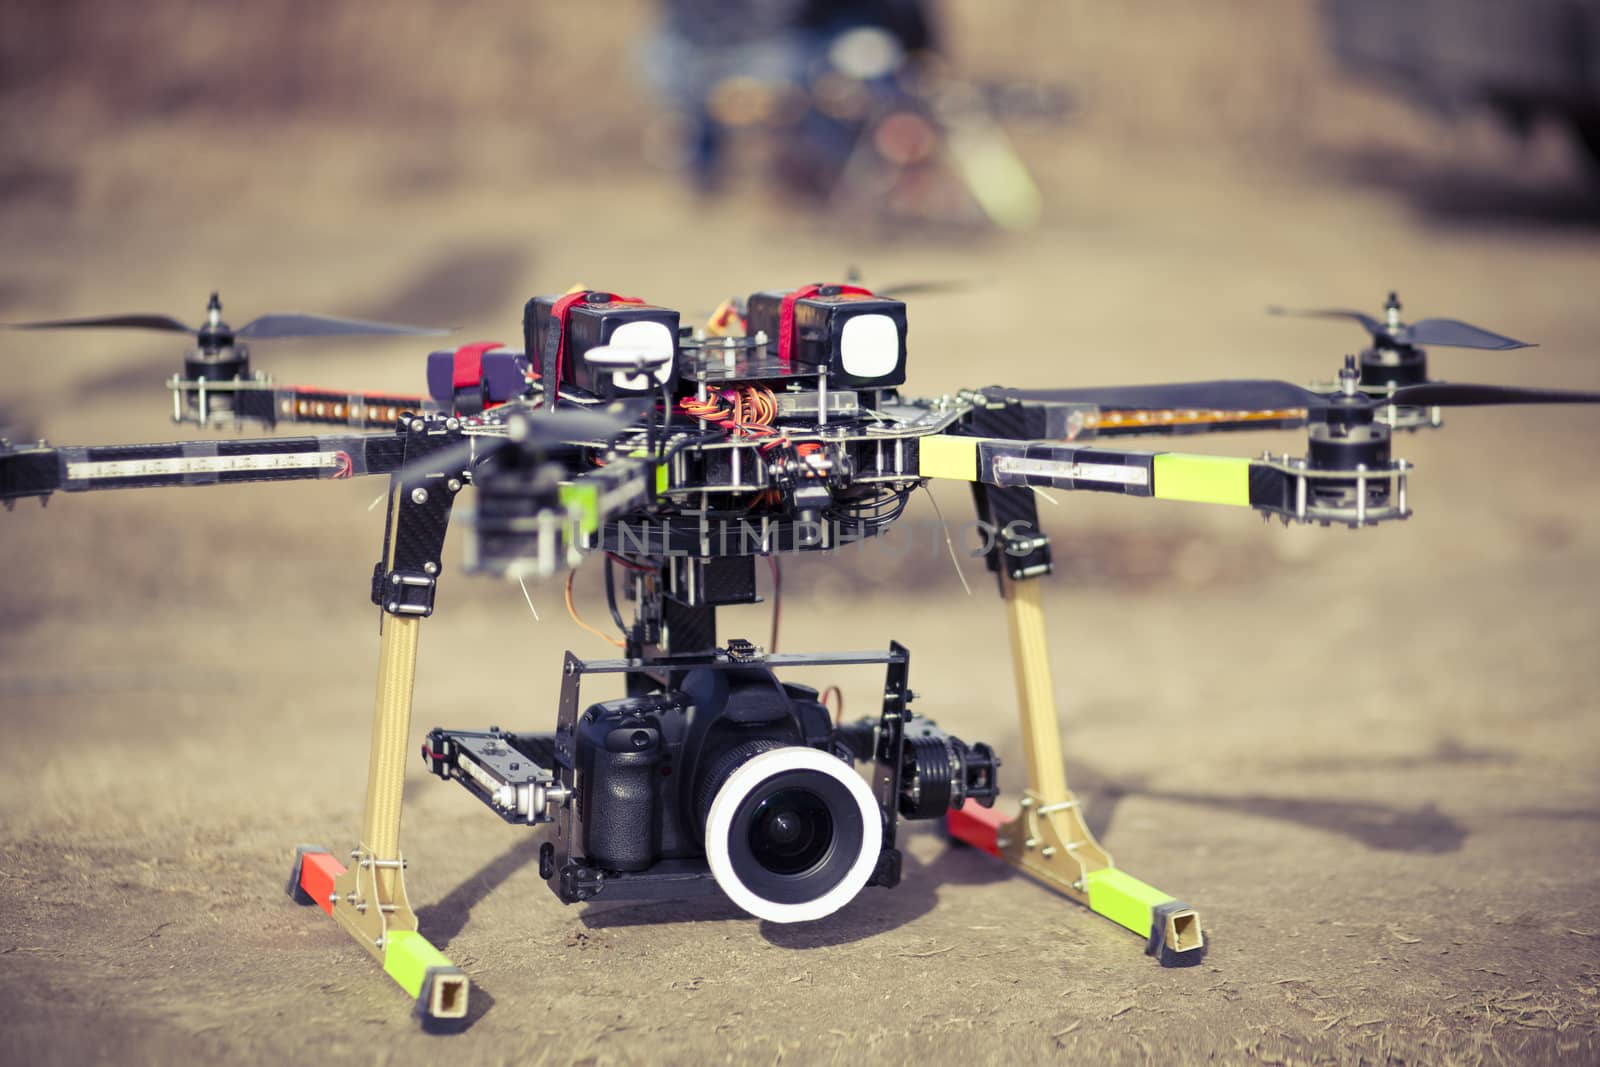 Octocopter drone ready to takeoff by Kor